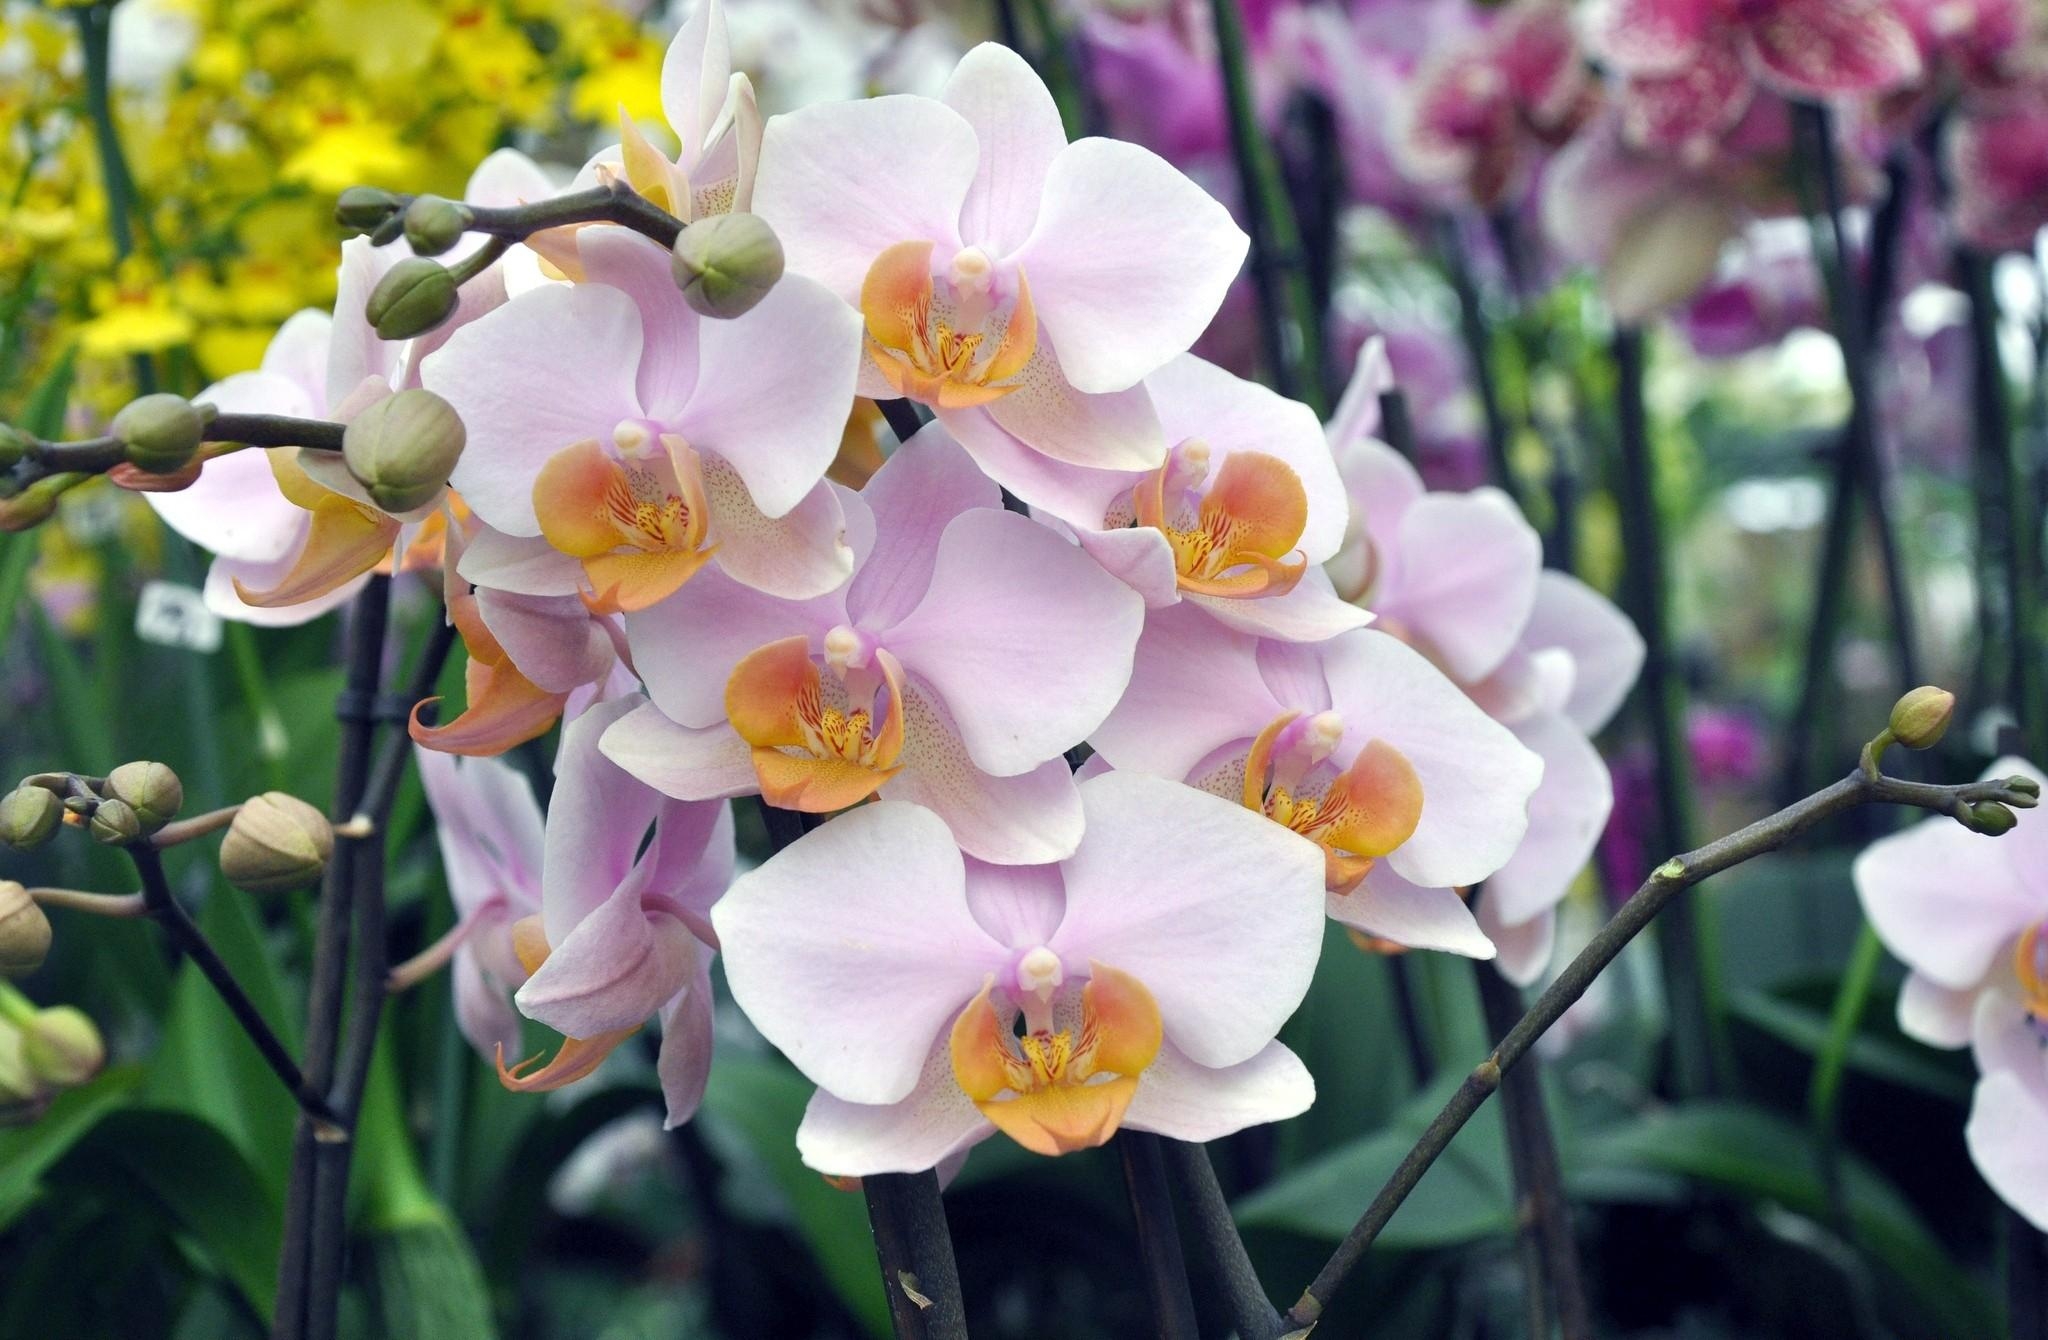 Popular Orchid Image for Phone